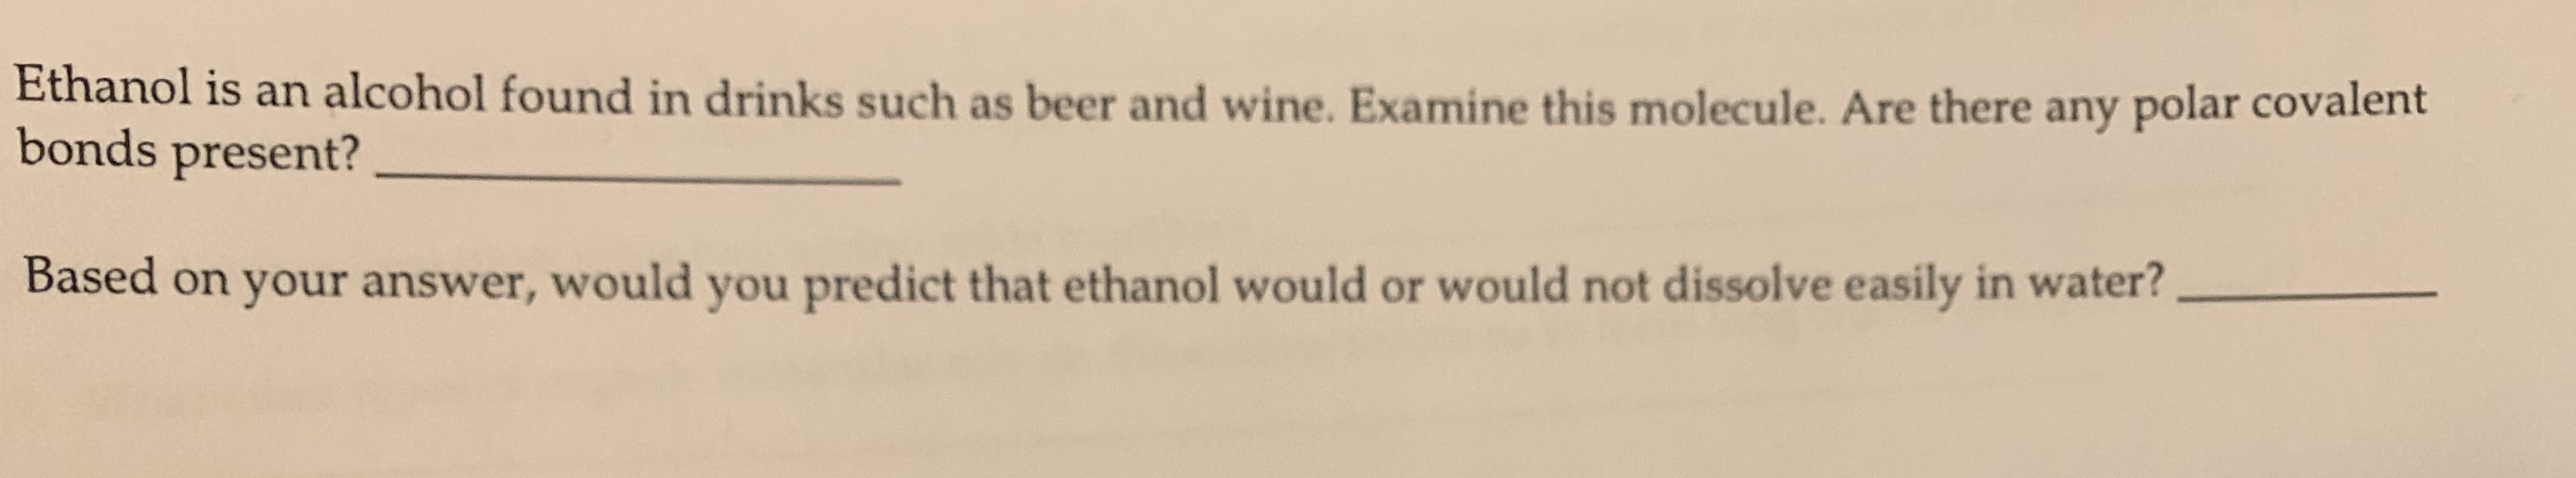 Ethanol is an alcohol found in drinks such as beer and wine. Examine this molecule. Are there any polar covalent
bonds present?
Based on your answer, would you predict that ethanol would or would not dissolve easily in water?
